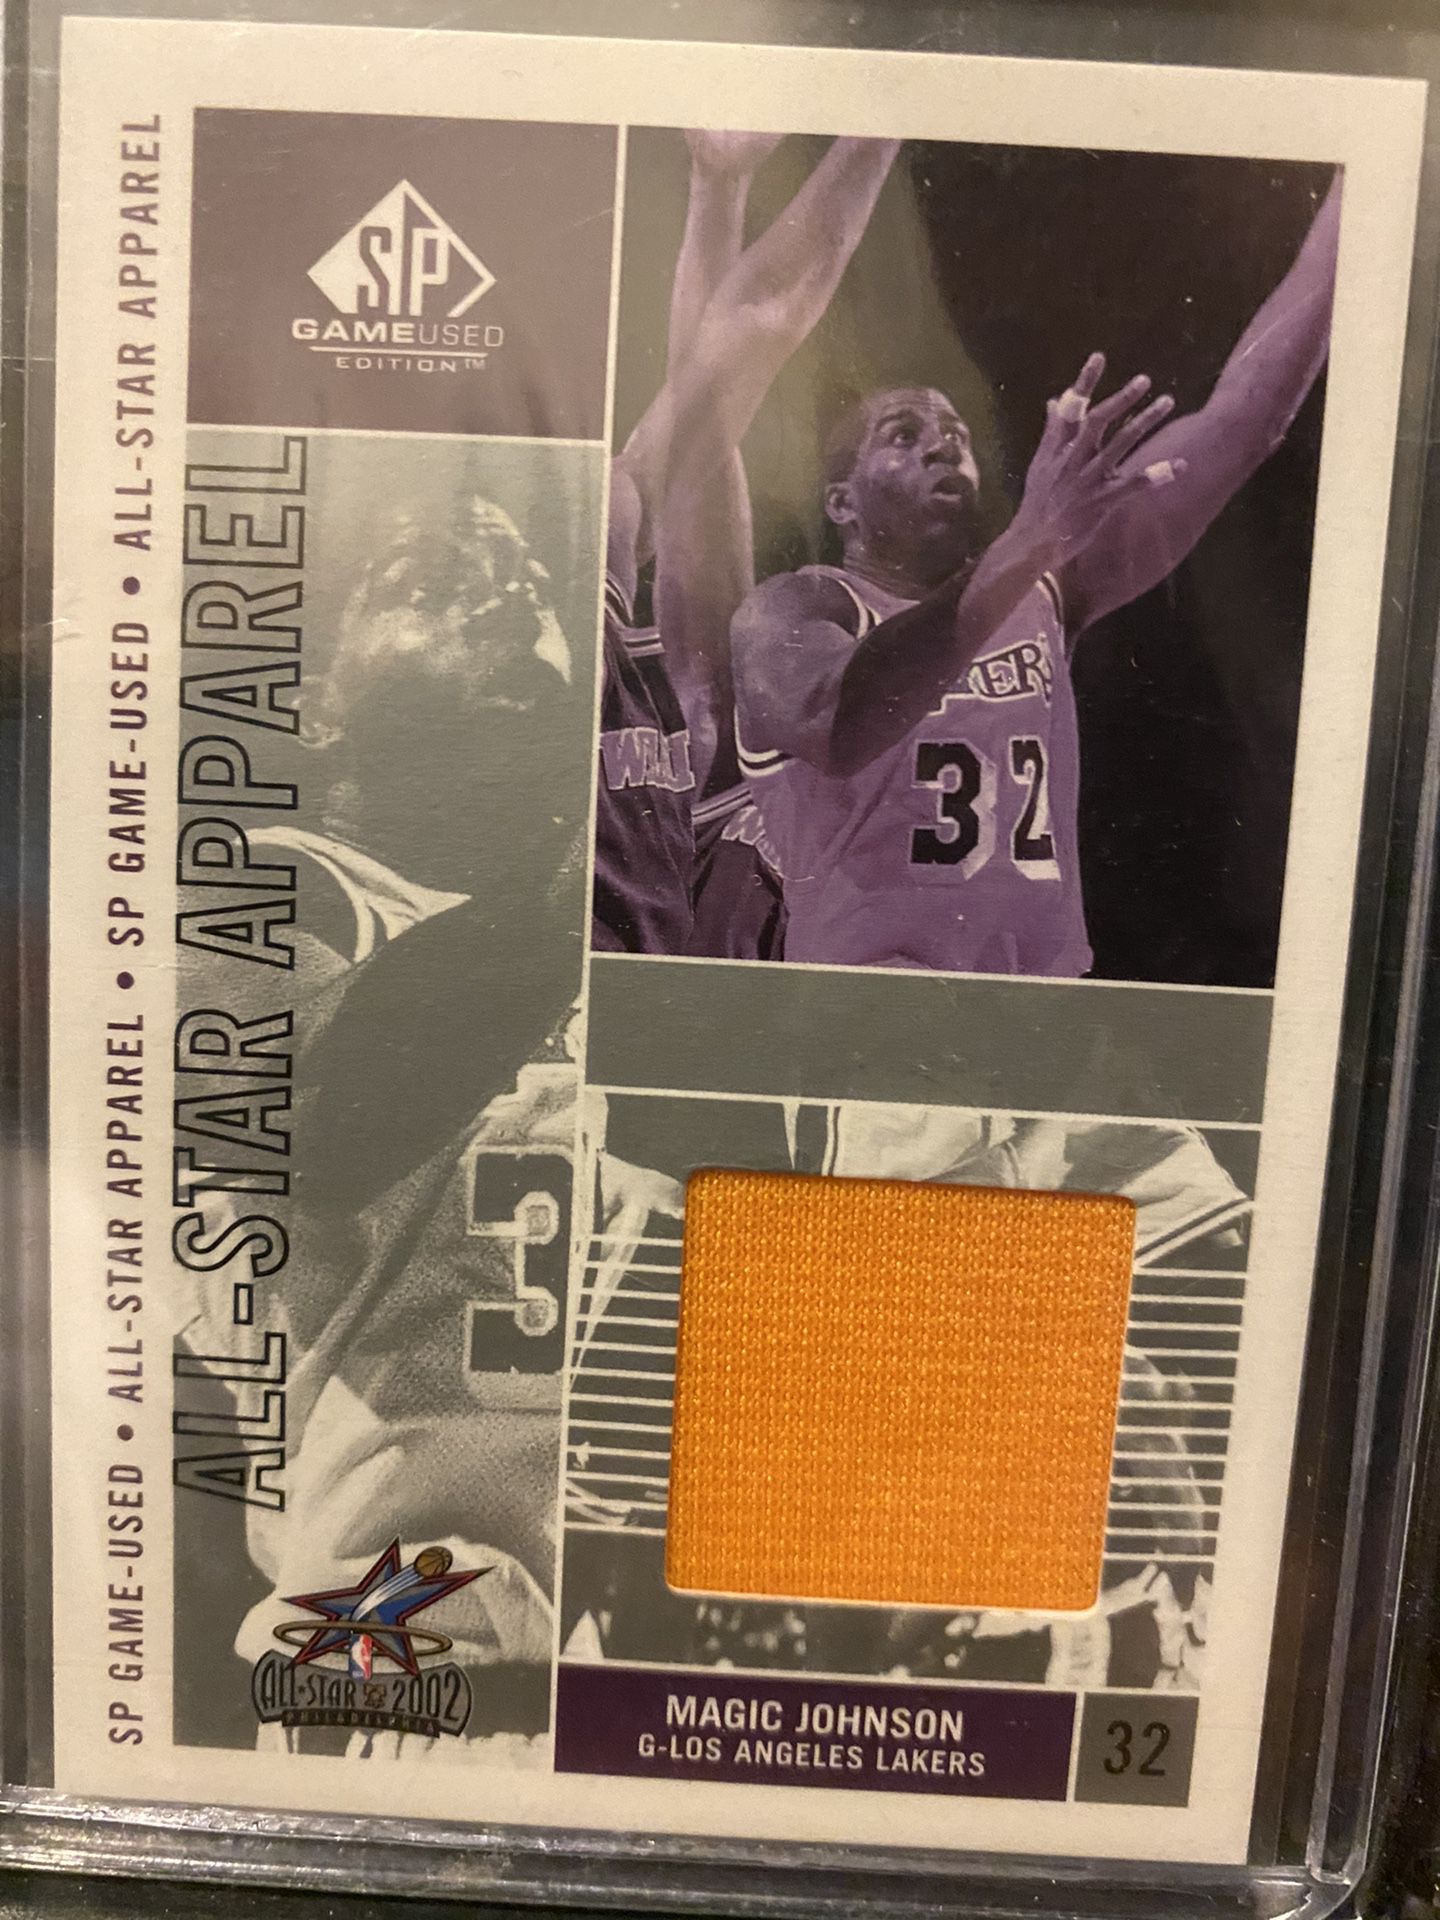 2002-03 SP Game Used MAGIC JOHNSON All-Star Apparel Lakers jersey relic card SP